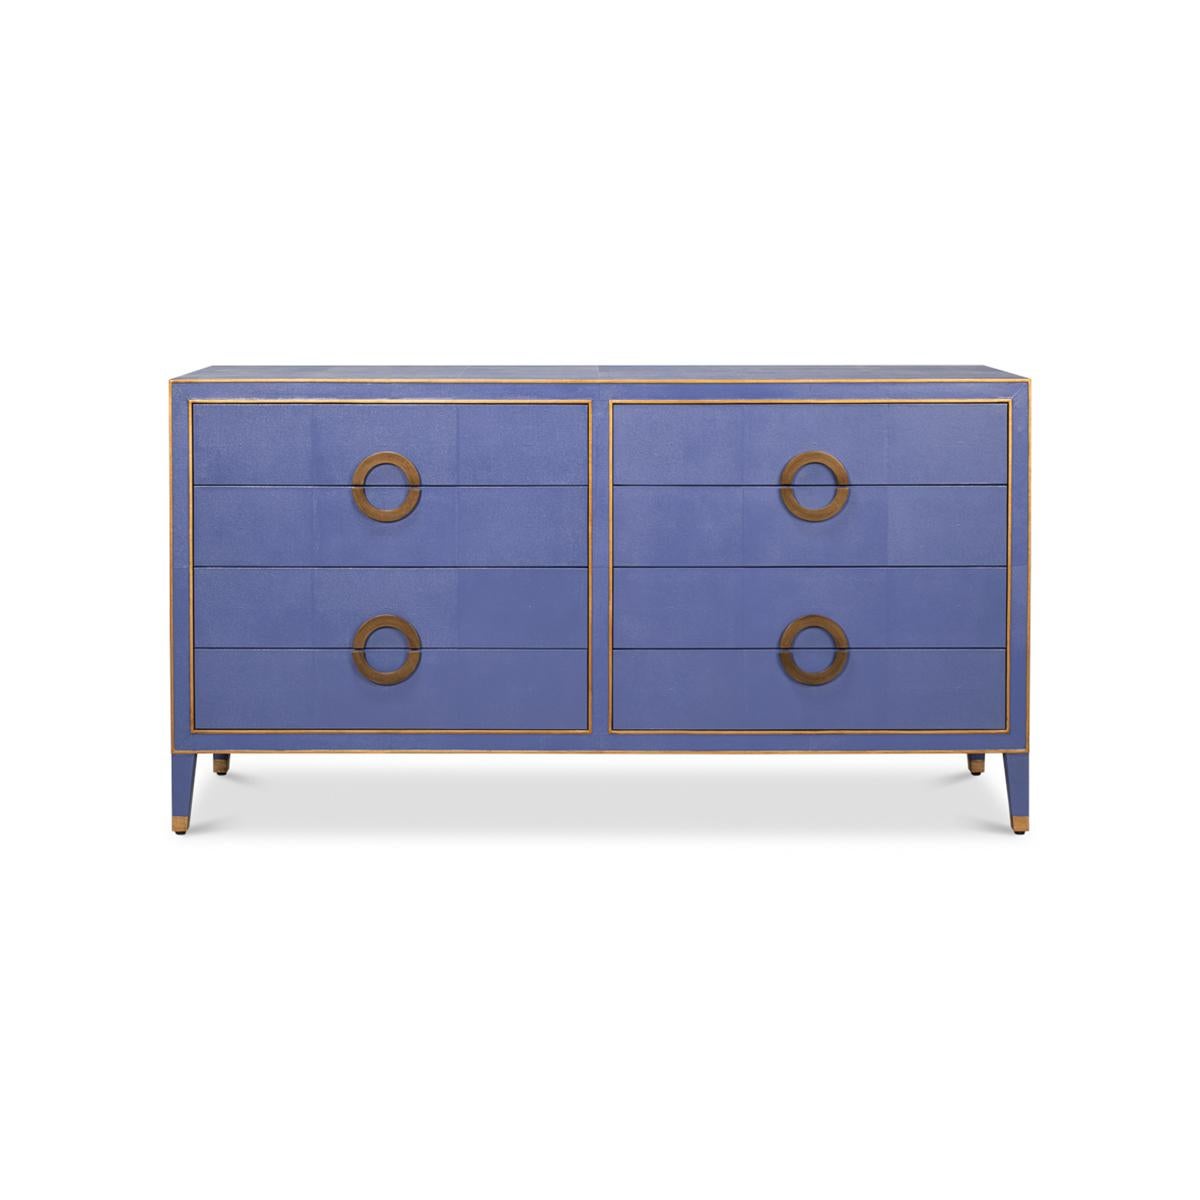 This exquisite piece features a rich cobalt blue shagreen embossed leather, which exudes an air of sophistication and luxury. The dresser is adorned with elegant gold ring handles and trim, adding a touch of glamour to its overall design.

With